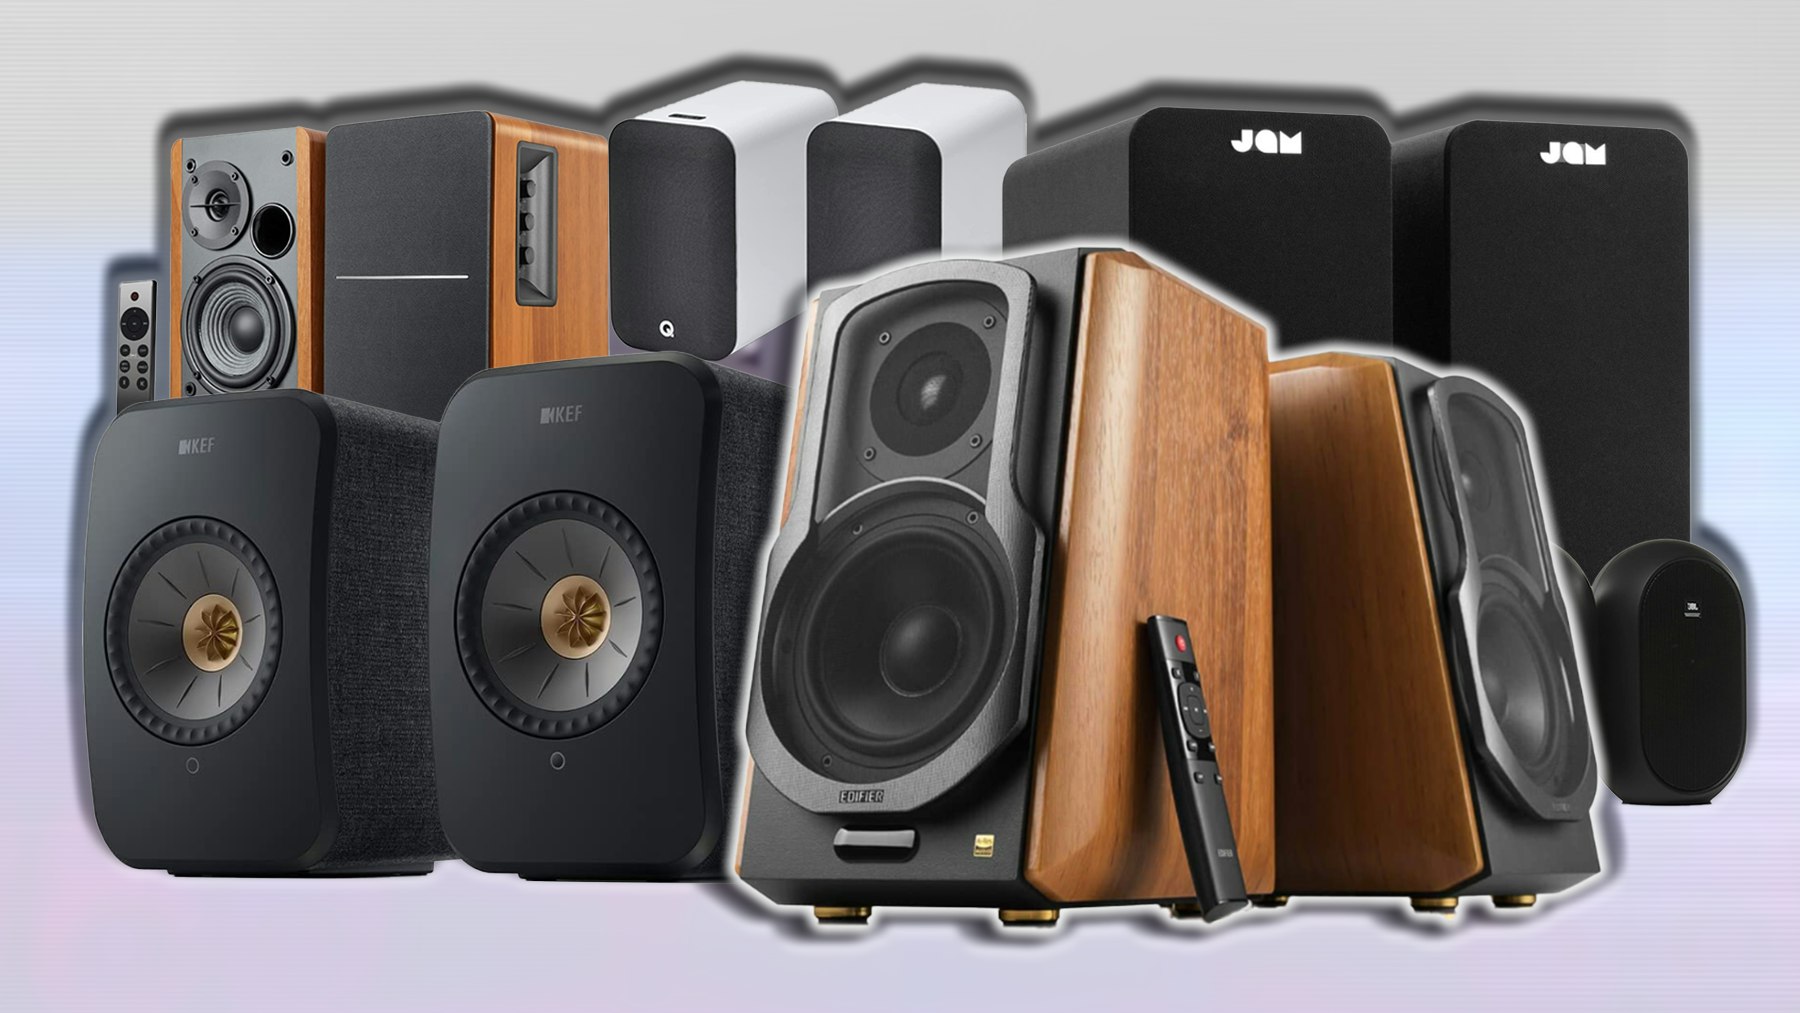 Cheap powered speakers even an audiophile could love